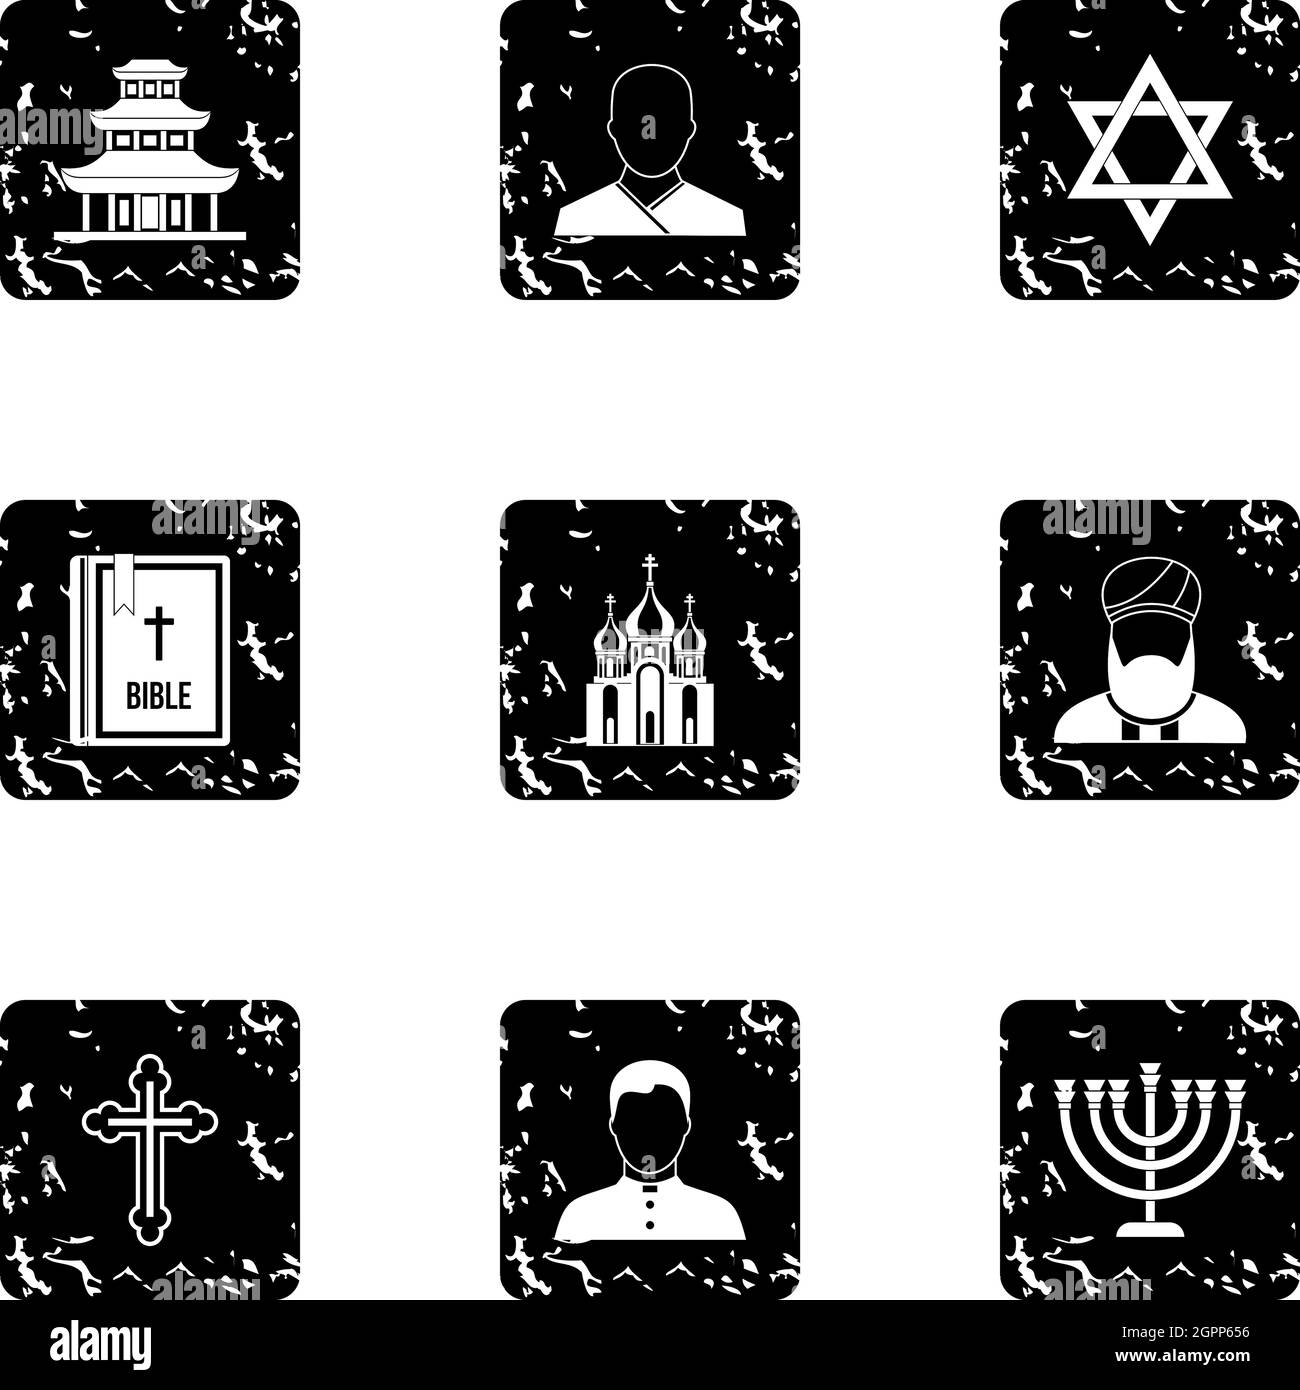 Beliefs icons set, grunge style Stock Vector